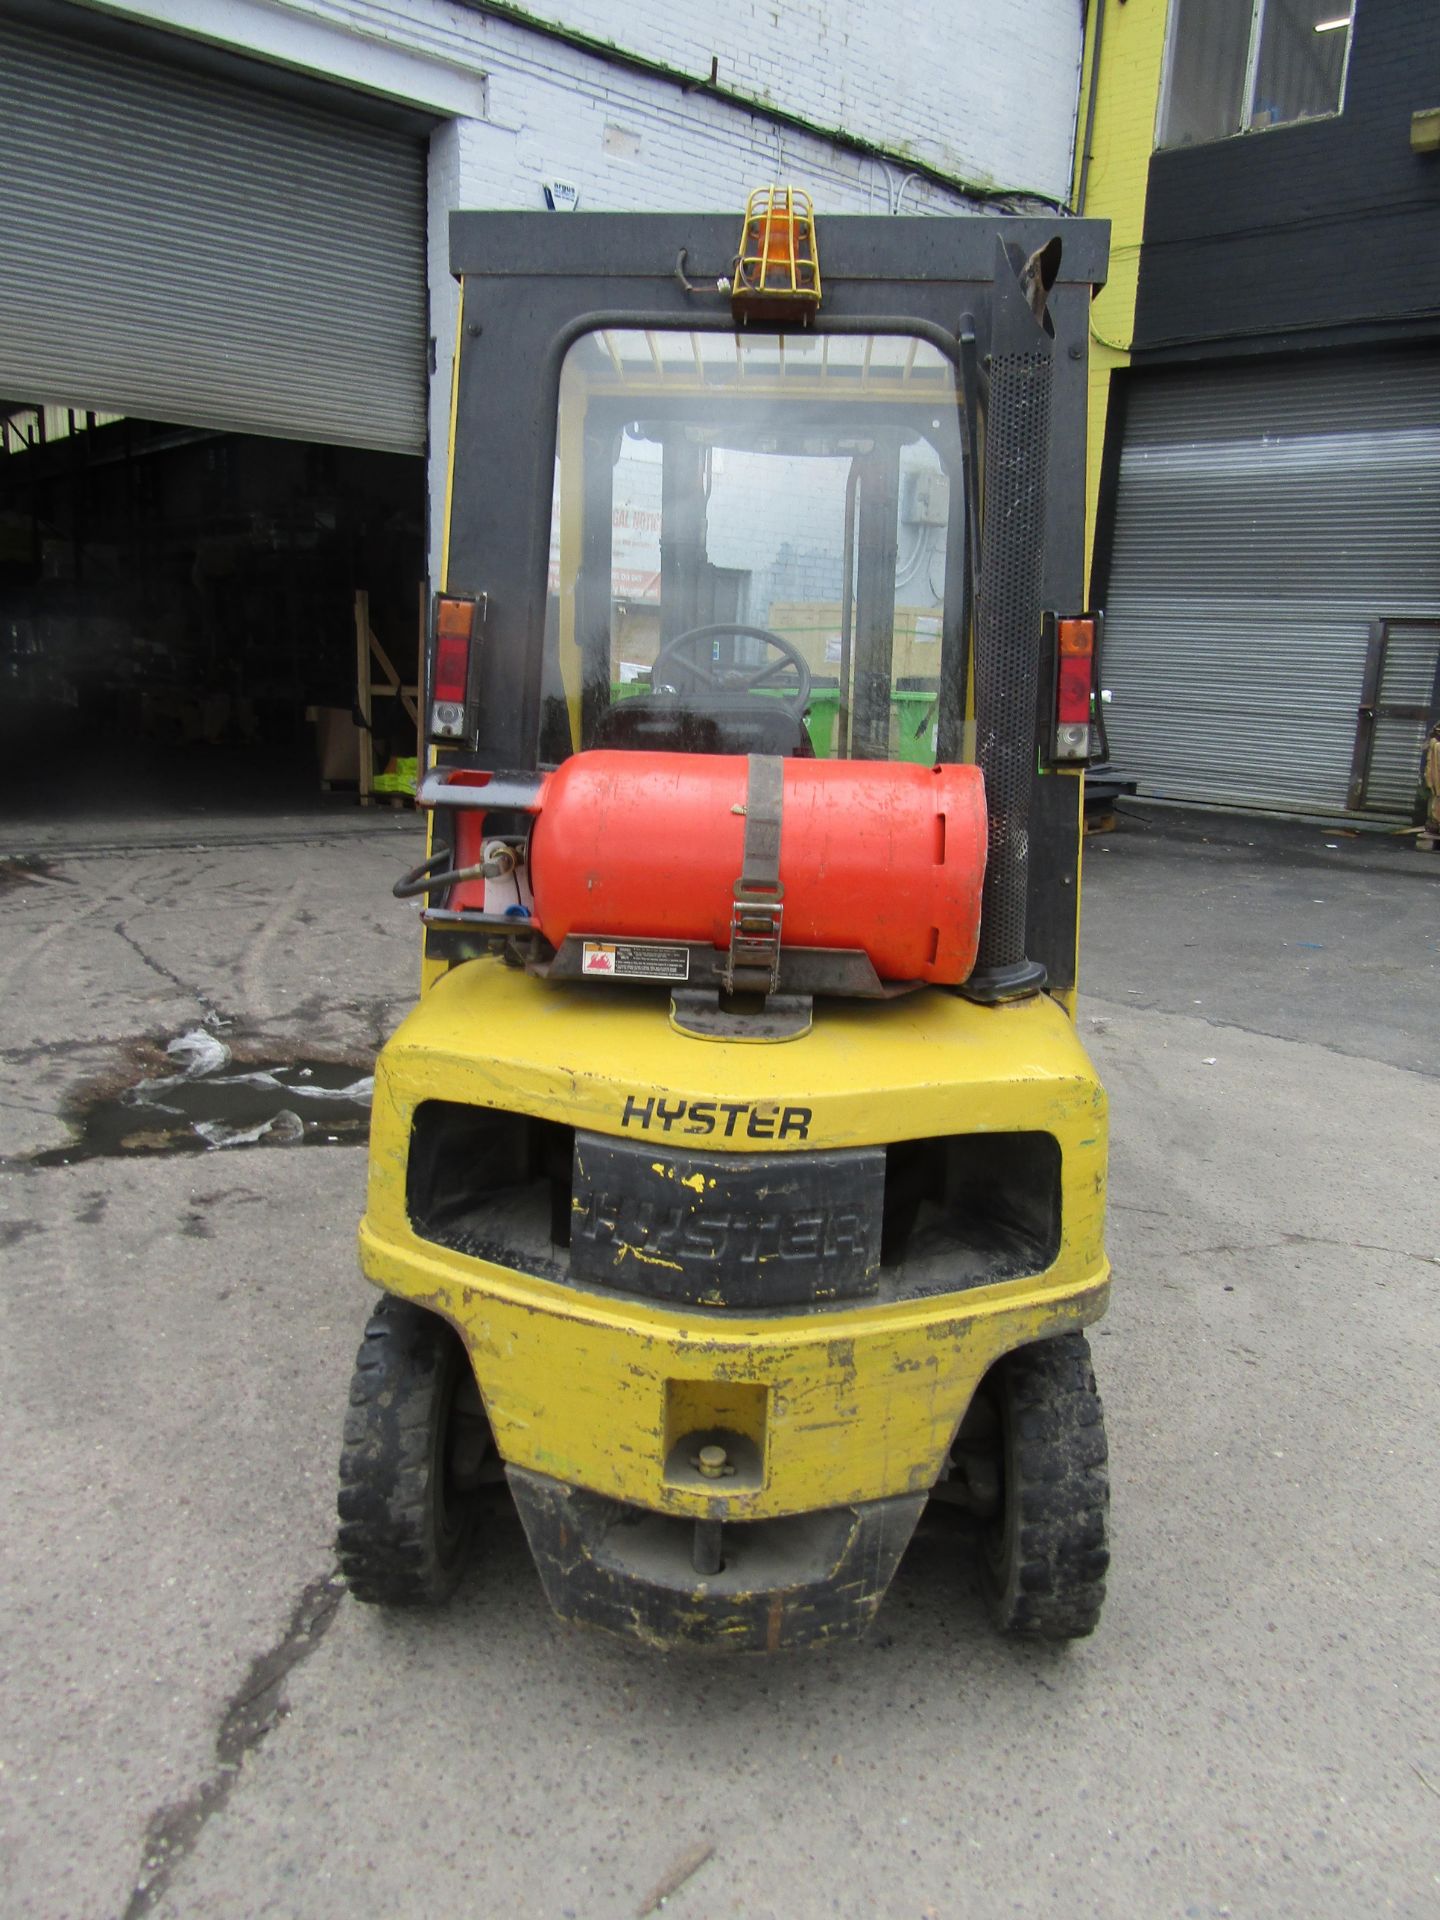 Hyster H2.00Xm forklift truck 7235 hours currently manufactured in 2004, has a roof as well as front - Bild 4 aus 9